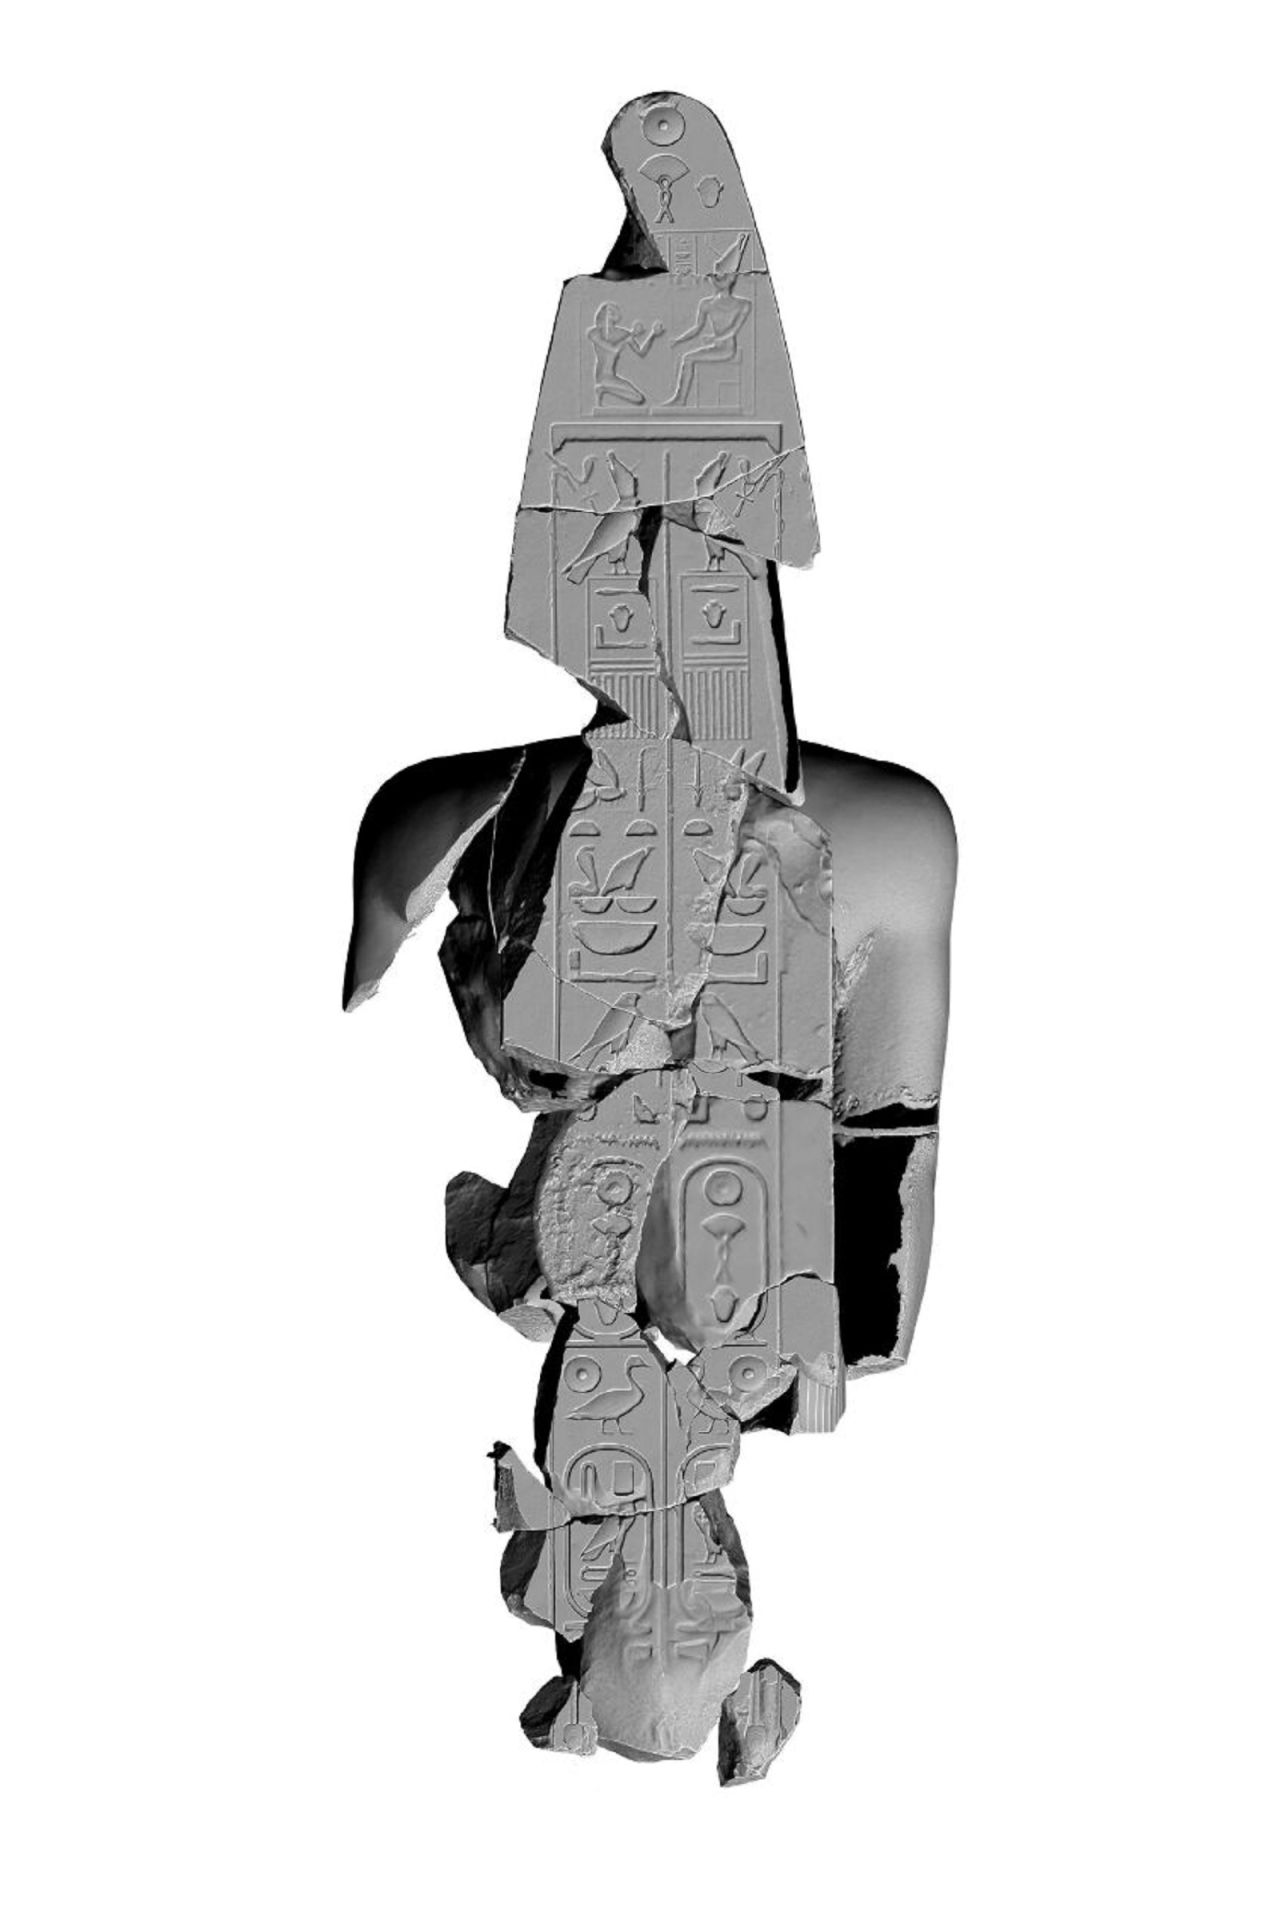 This visualization of the back pillar of the quartzite statue shows an inscription giving the full title of King Psamtik. Christopher Breninek worked on the visualizations for the Heliopolis Project.